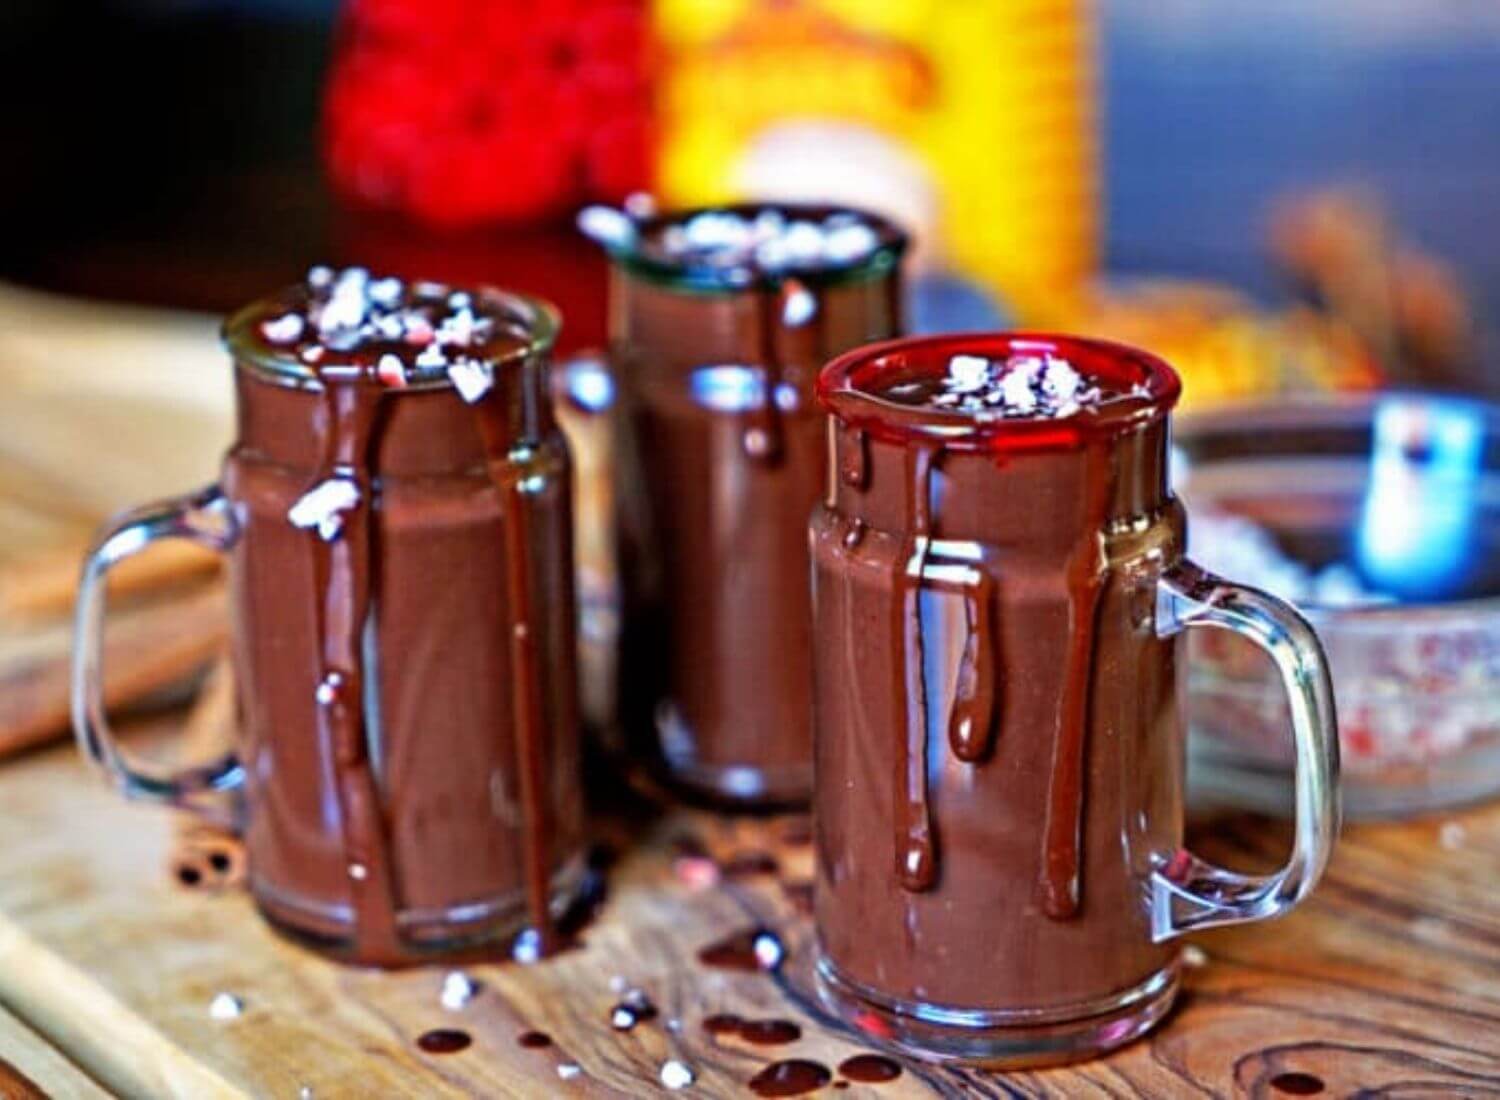 15 Indulging Hot Chocolate Drinks You Need To Try!